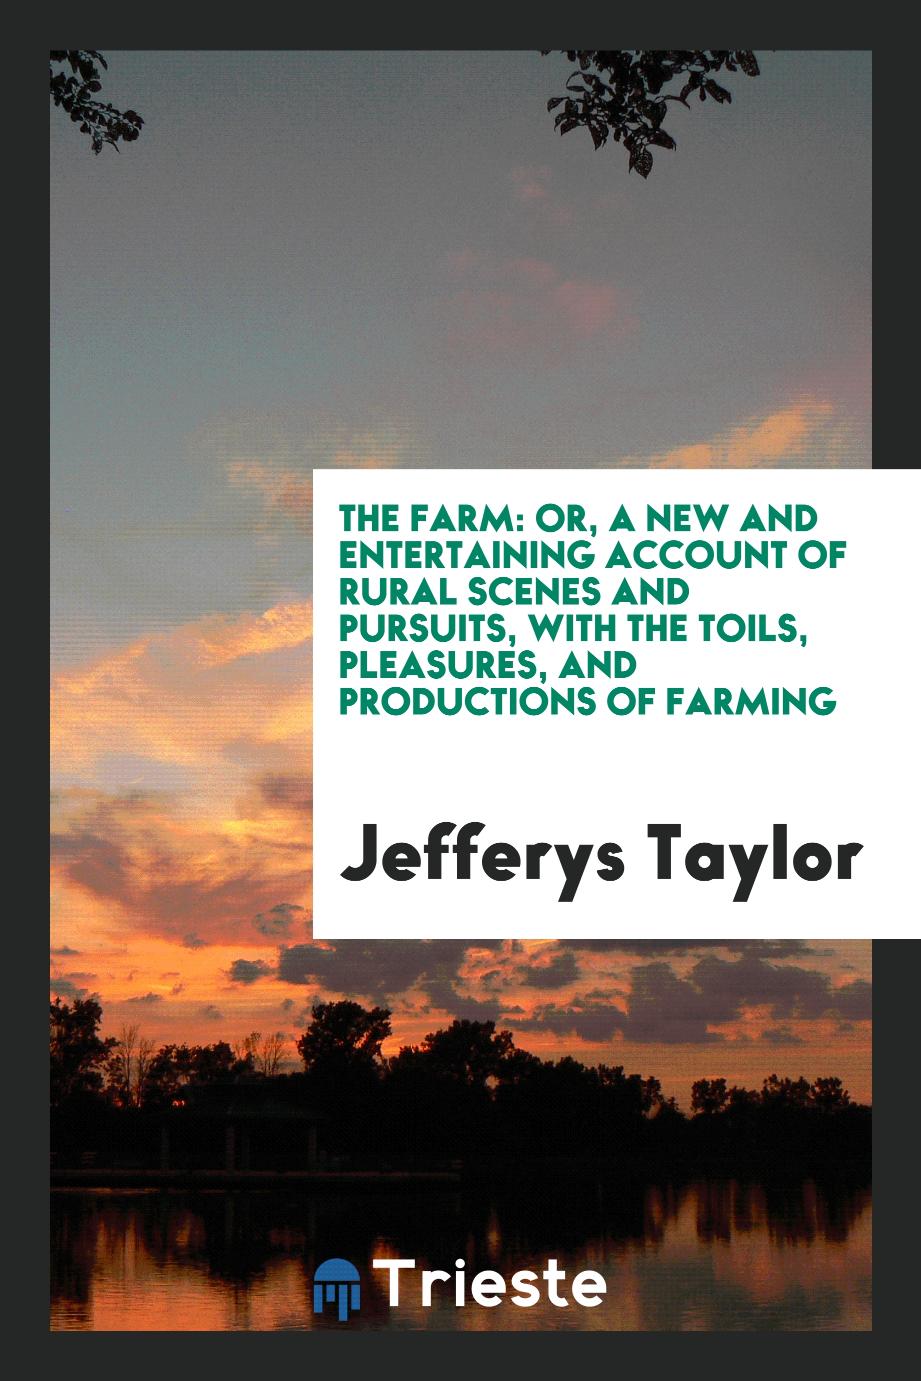 The Farm: Or, A New and Entertaining Account of Rural Scenes and Pursuits, with the Toils, Pleasures, and Productions of Farming